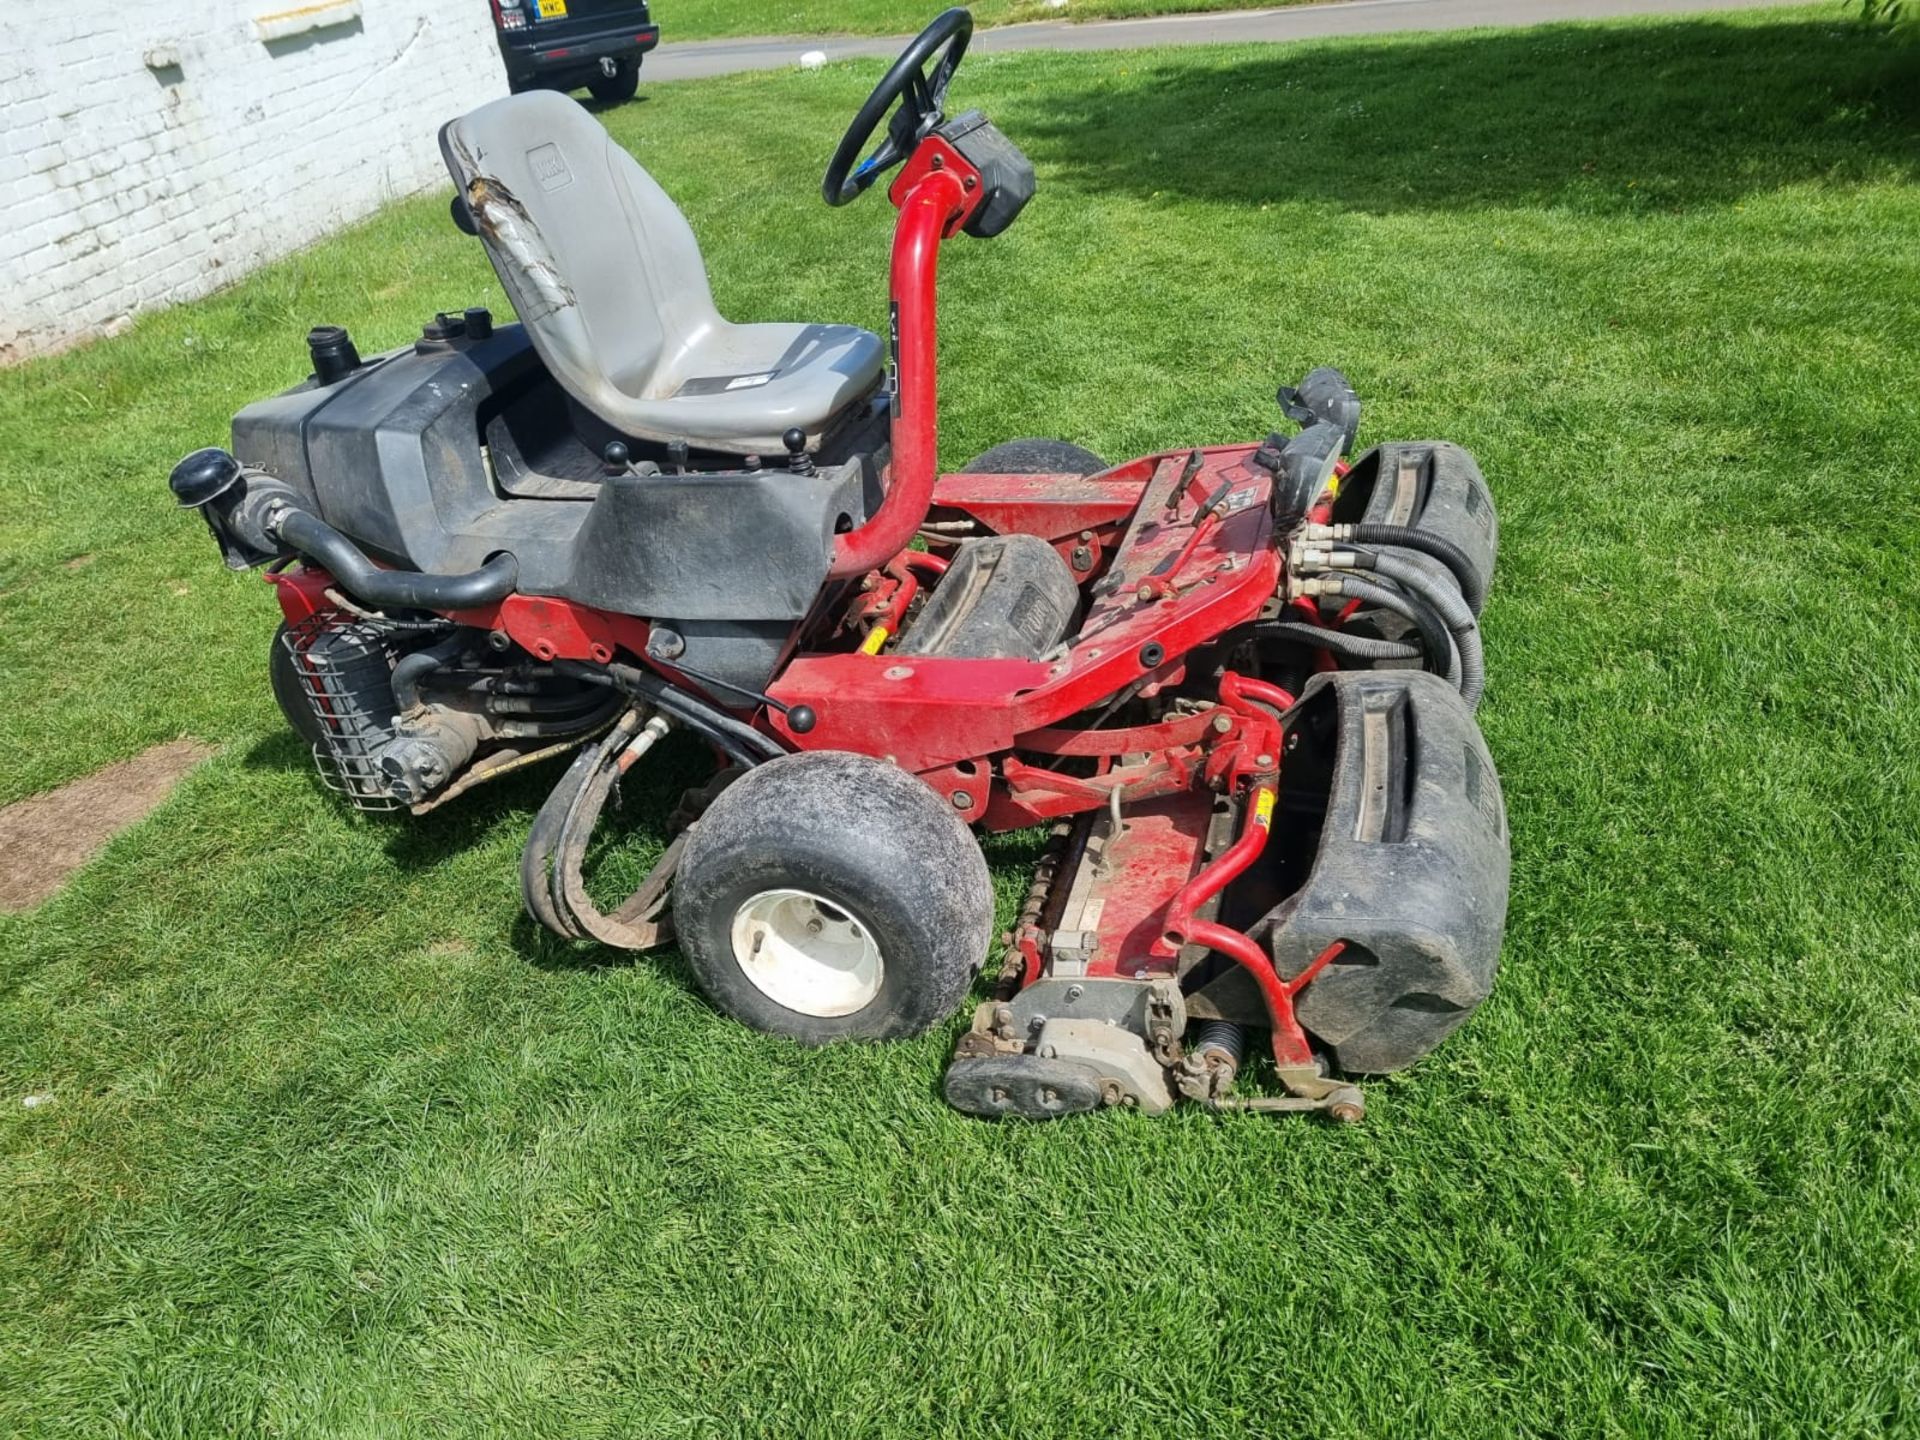 Toro Greensmaster 3250-D Mower YOM 2008 Hours 4121.6 (s/n 3632800001129) Features Briggs & - Image 3 of 10